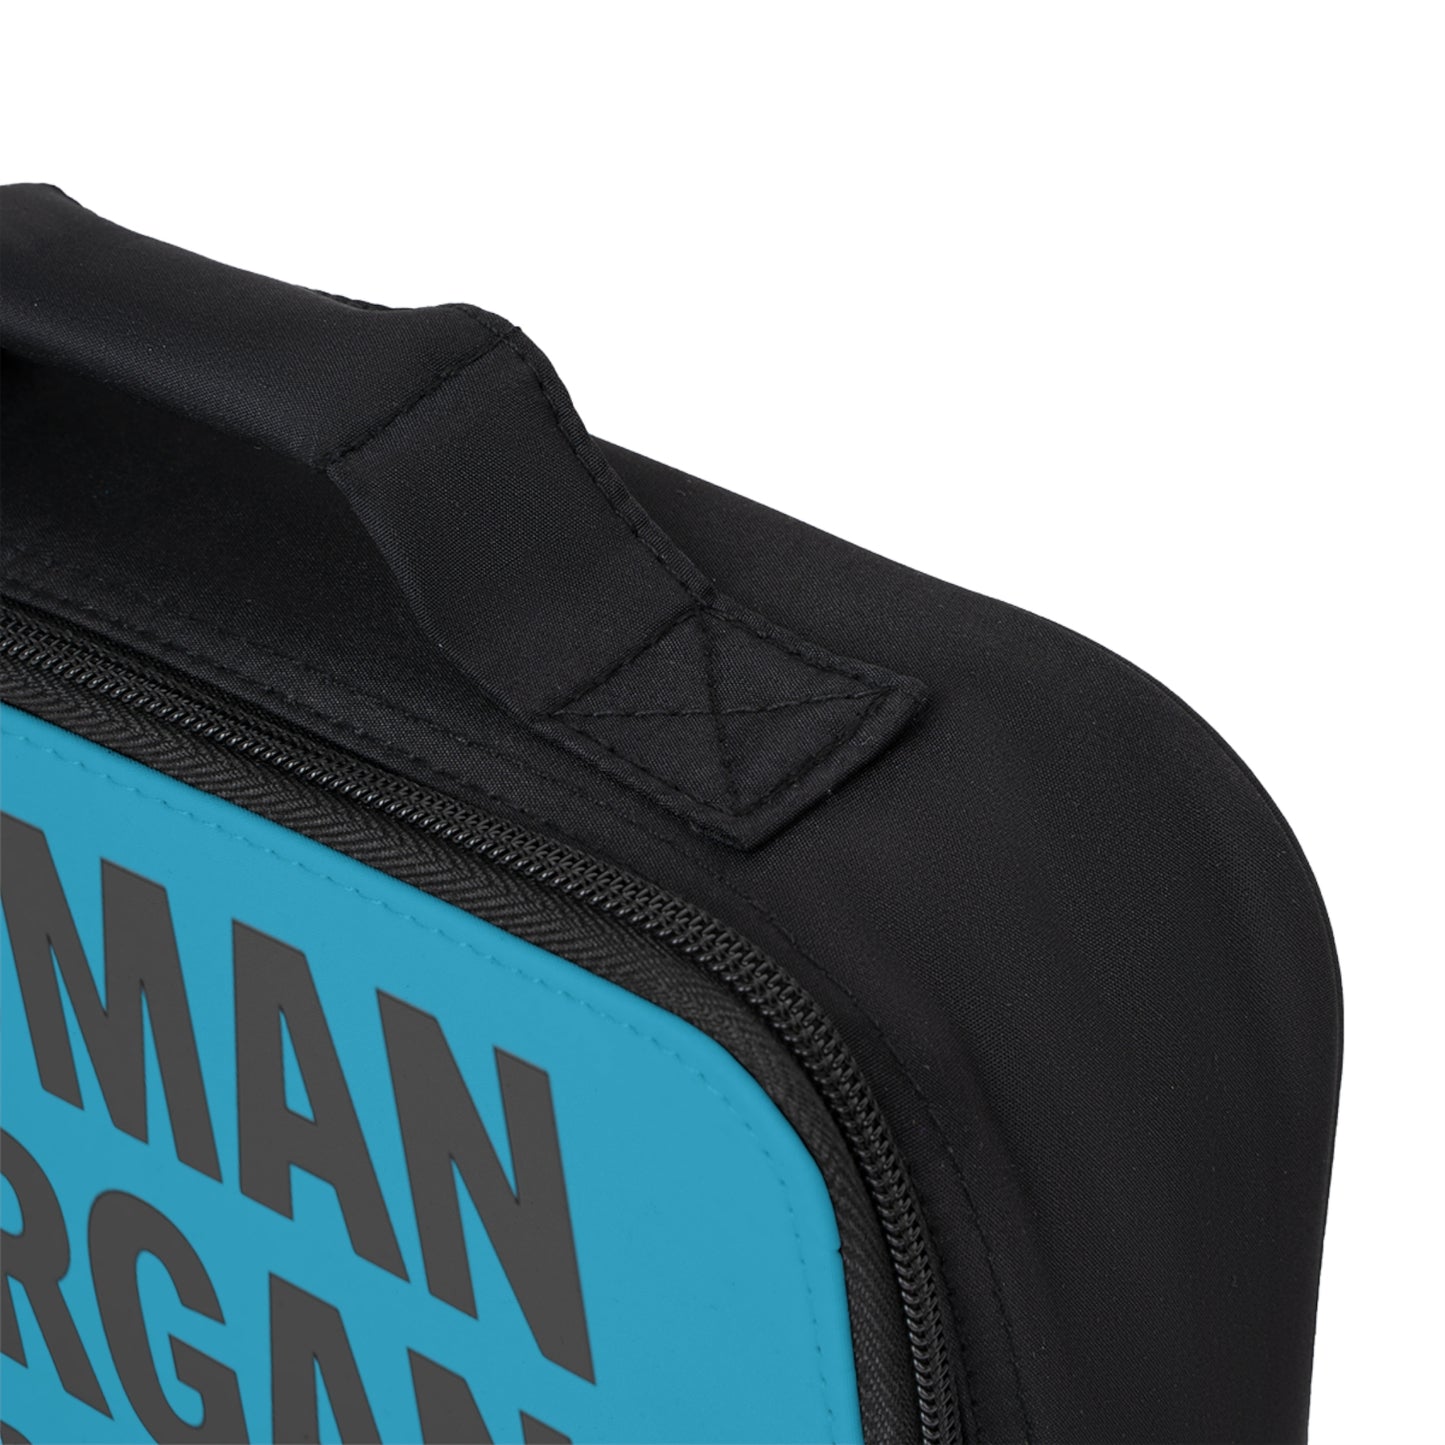 Human Organ for Donation & Snacks - Turquoise - Lunch Bag